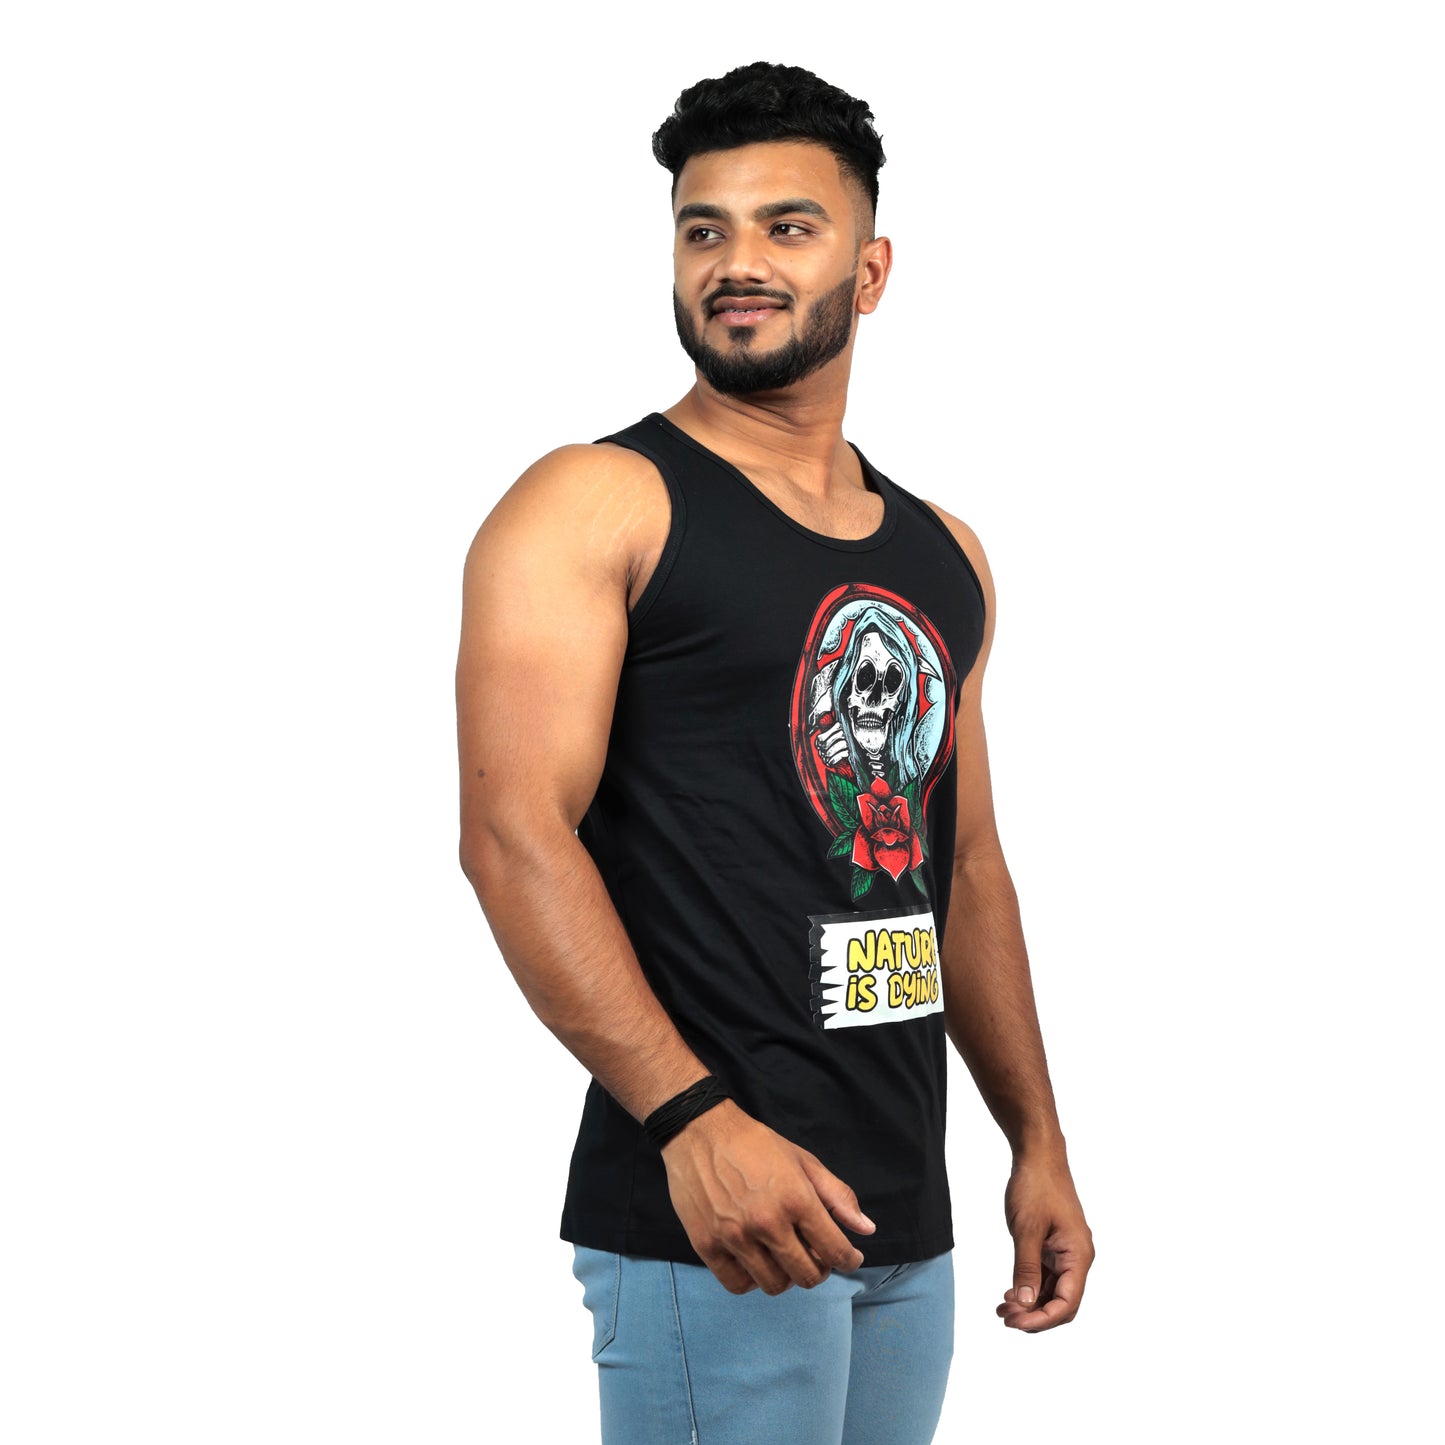 Nature Is Dying Printed Gym Vest For Men